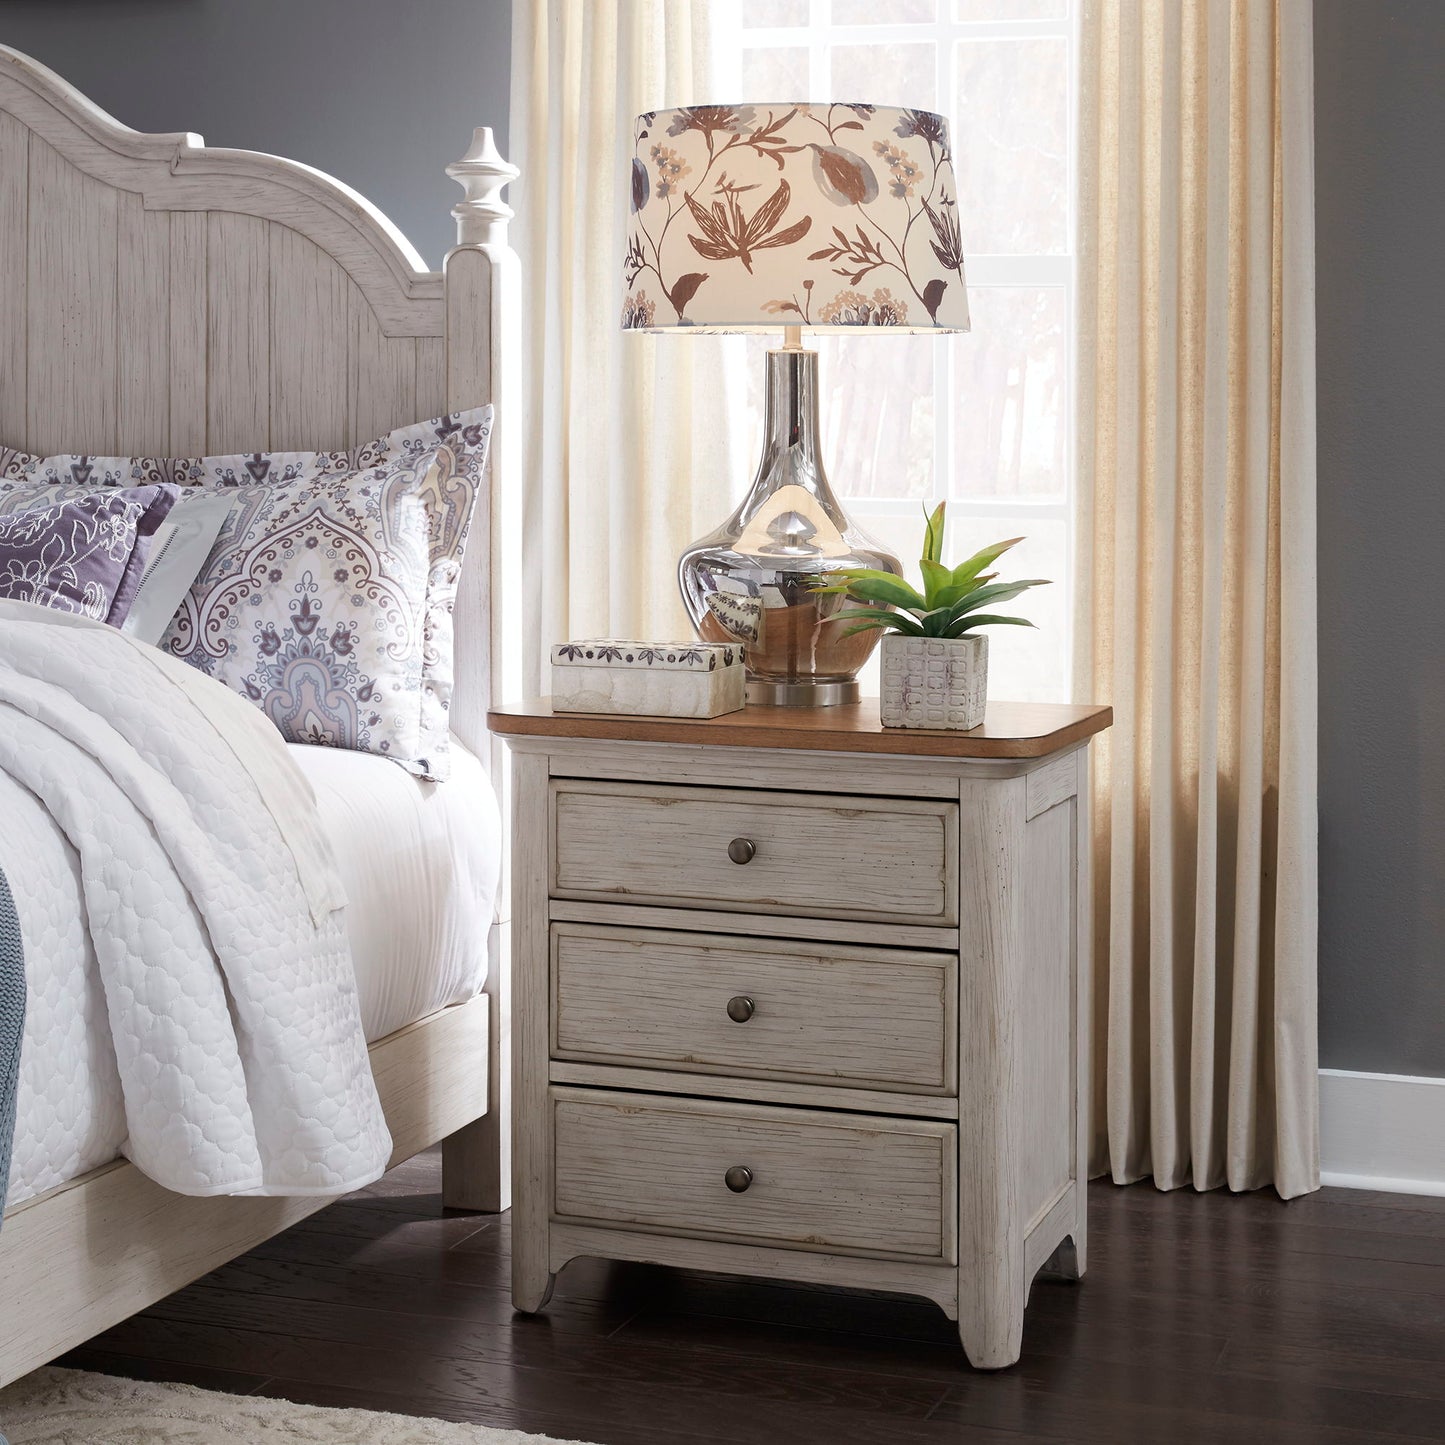 Farmhouse Reimagined - 3 Drawer Night Stand With Charging Station - White